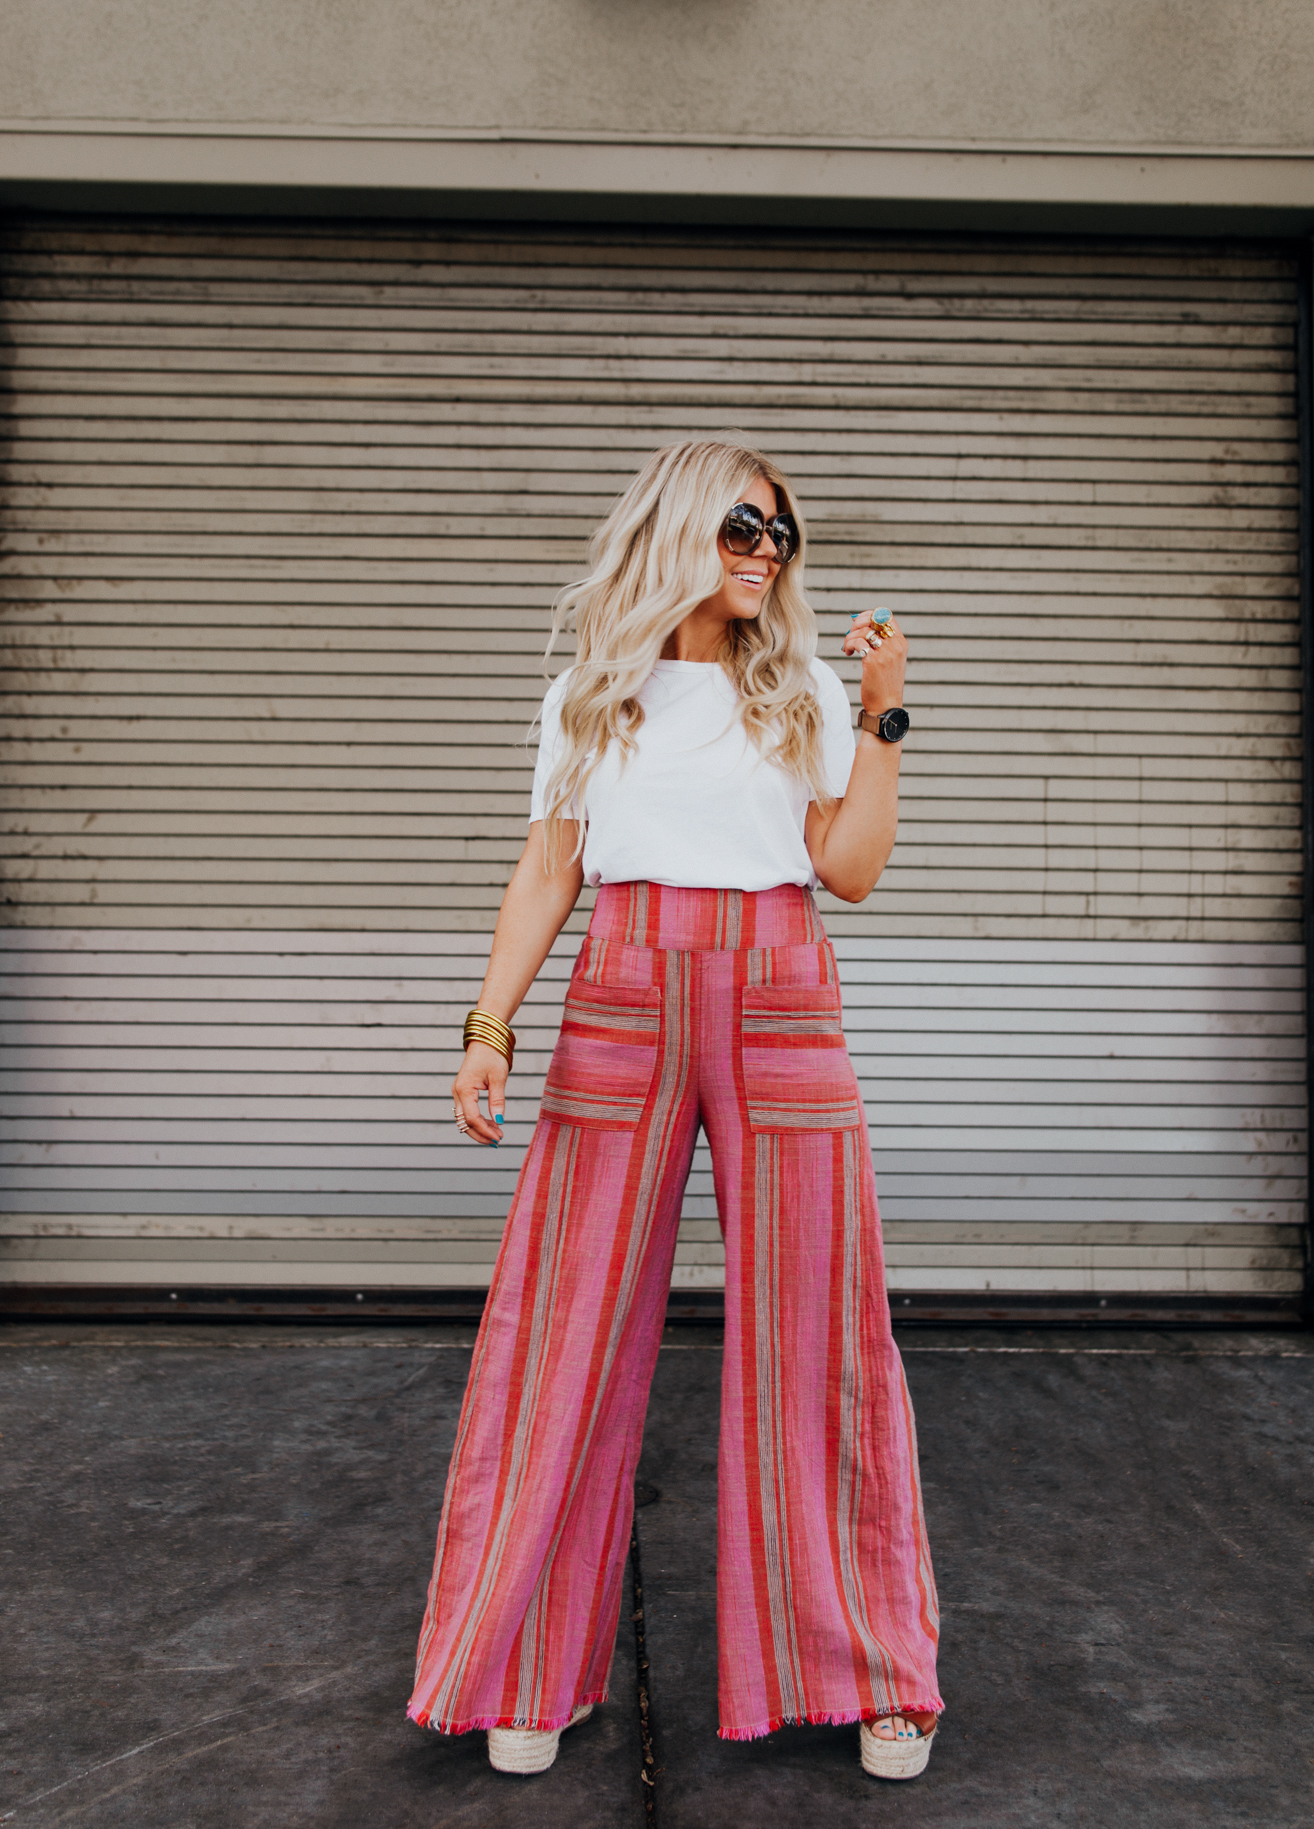 How to Style Patterned Pants & Spring Pieces